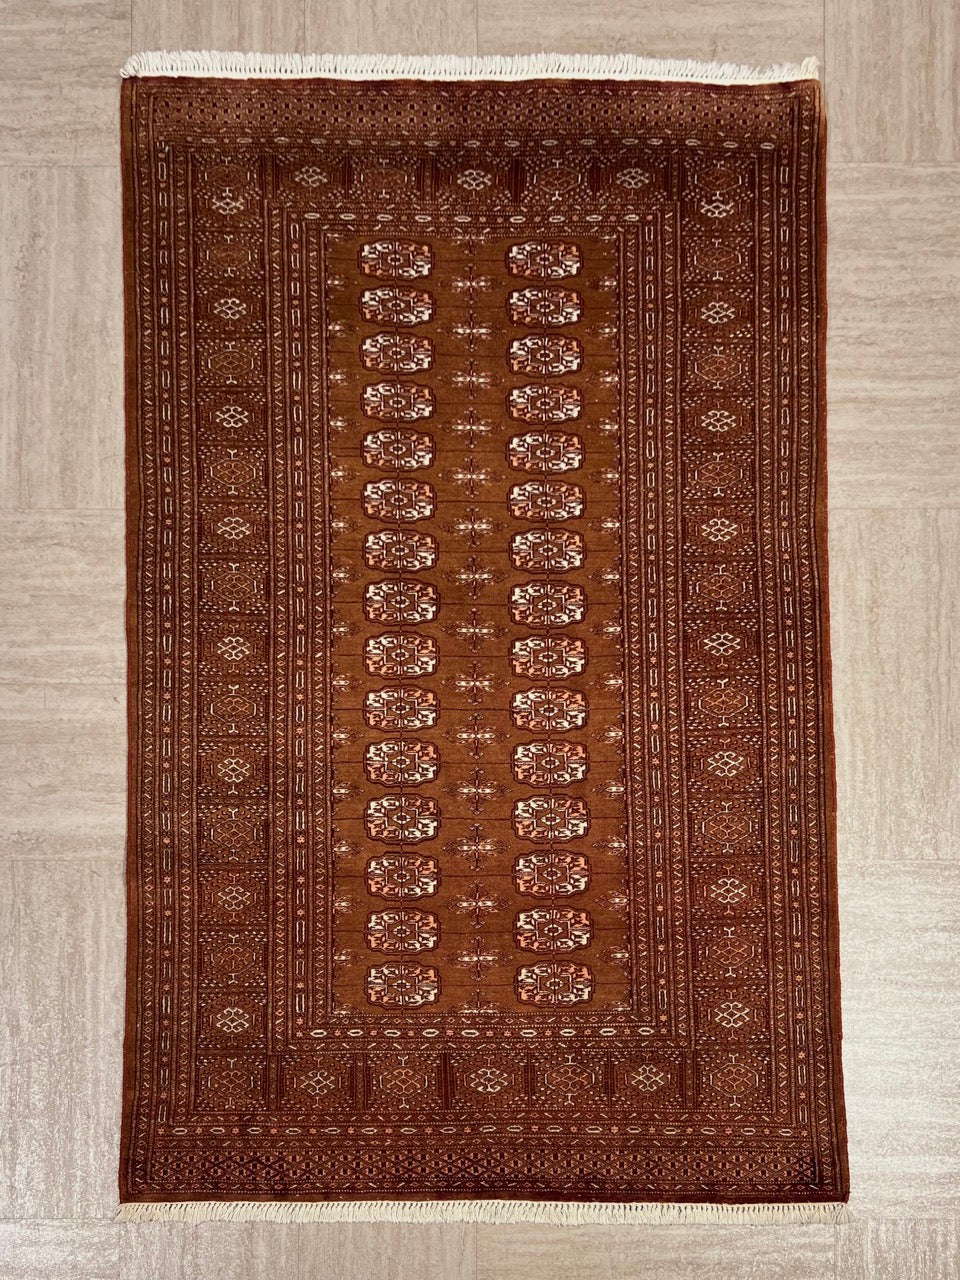 Wool Hand-Knotted Bokhara Rug From Pakistan. product image #27556378083498